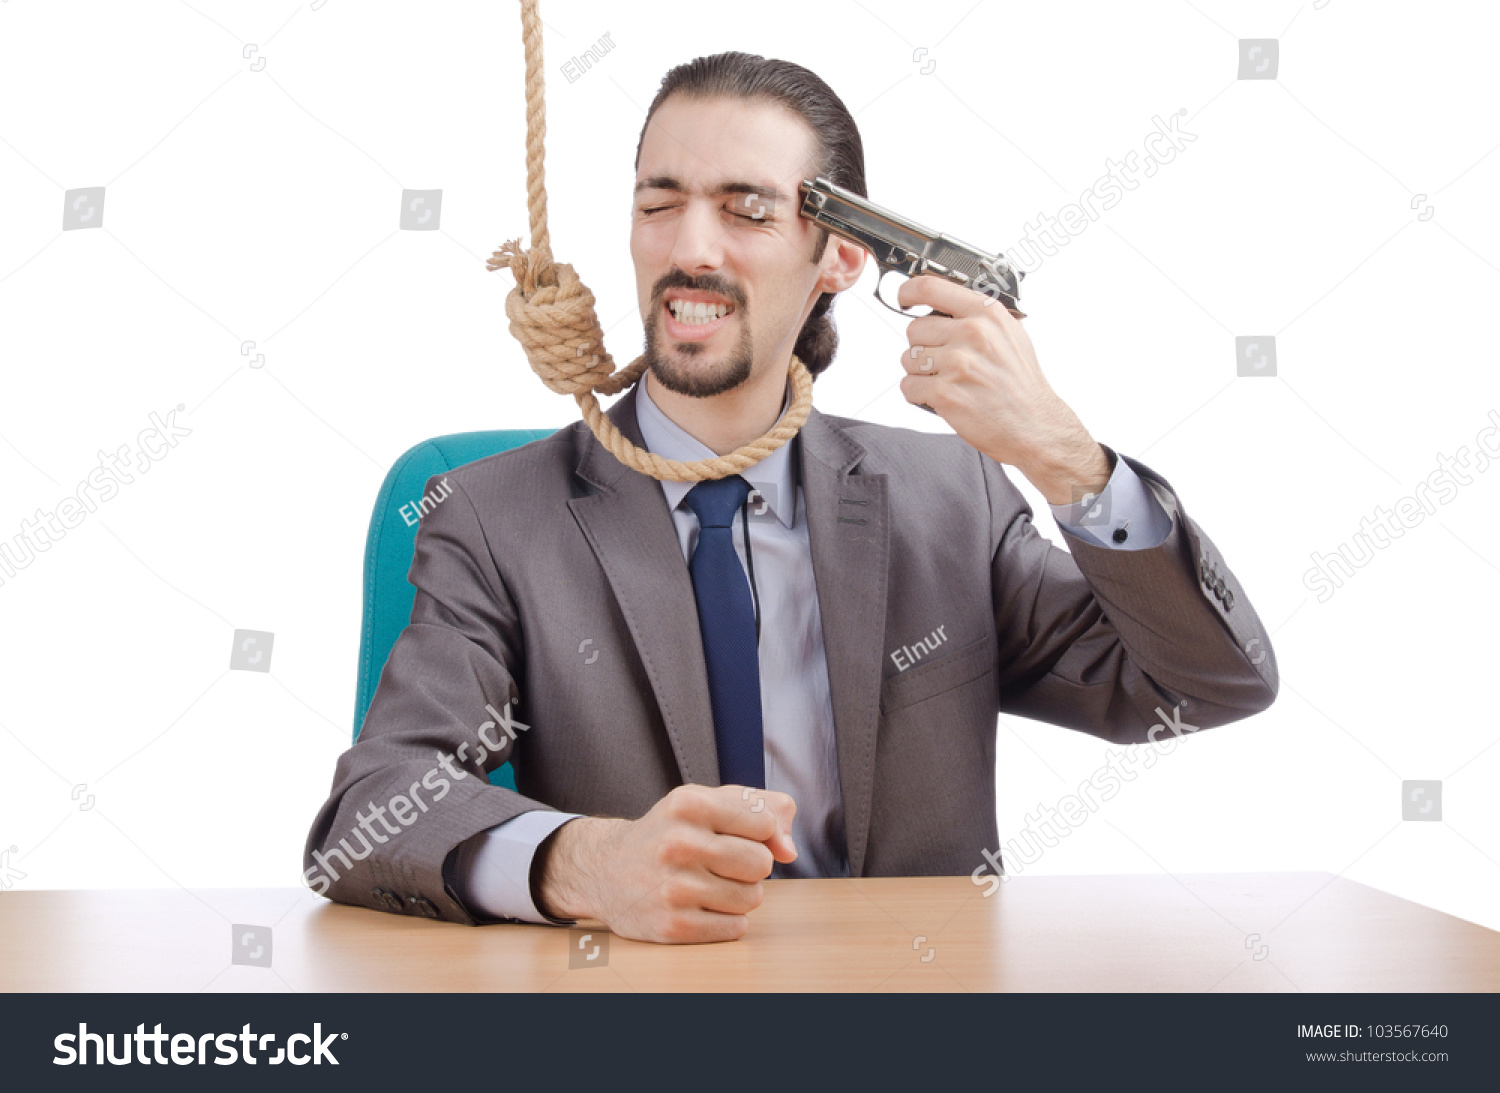 SCRUB THE POOPDECK AND SWASHBUCKLE ME CRUCKLES MATEYS IM BACK ON THIS VESSEL Stock-photo-businessman-man-with-hand-gun-103567640